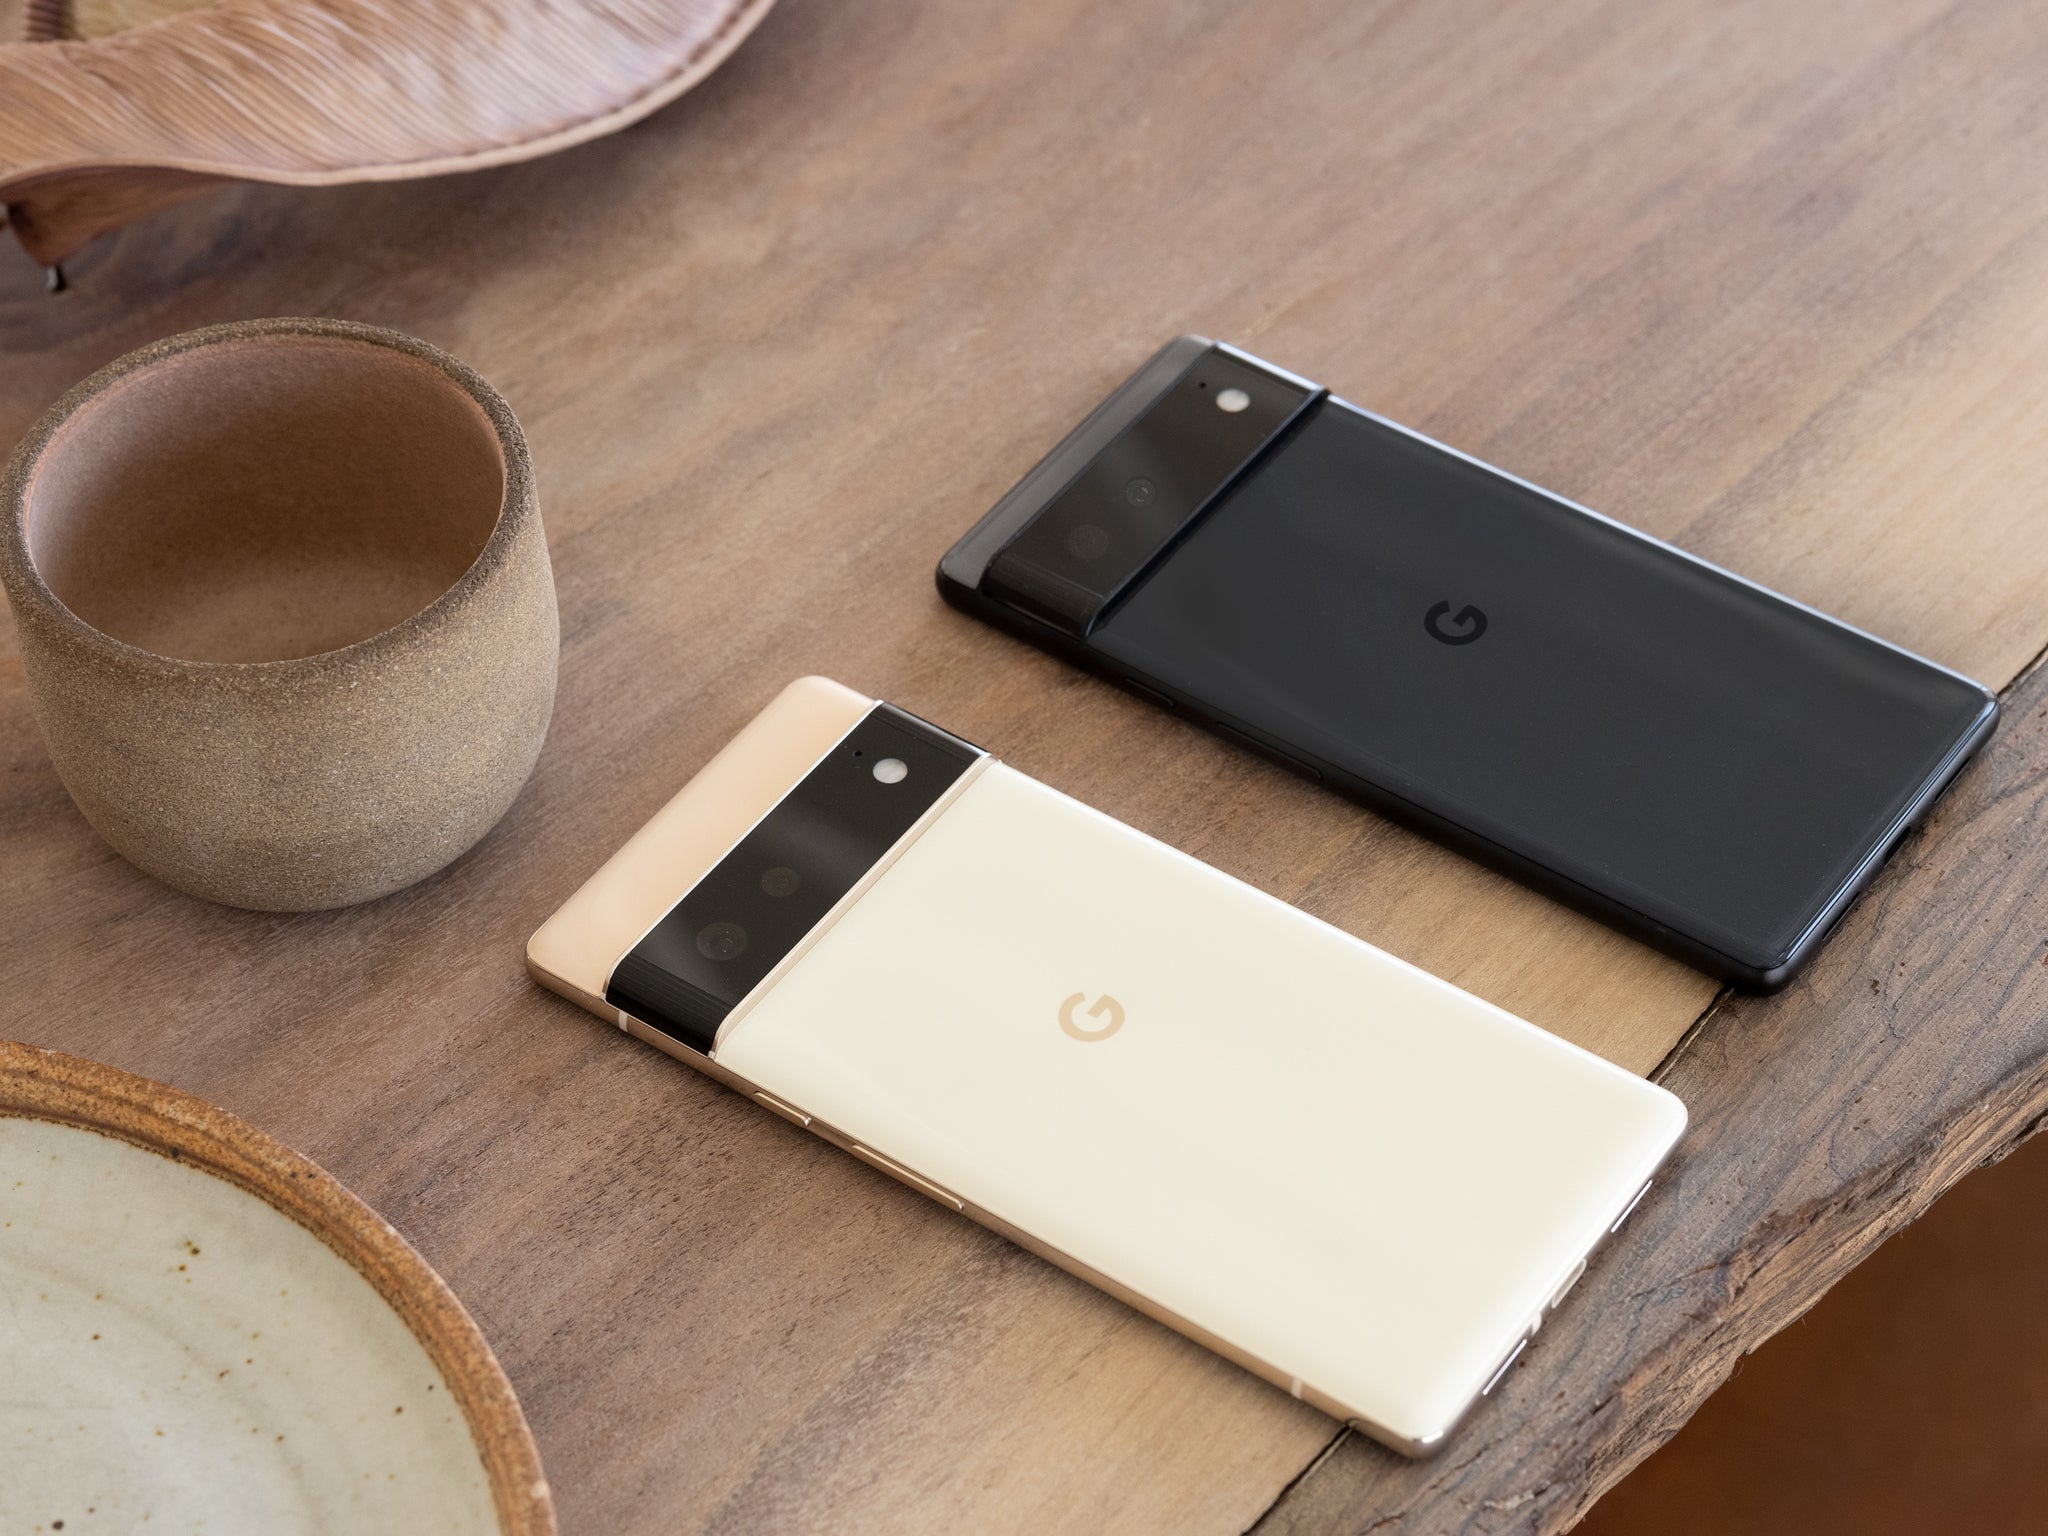 The Pixel 6 is only slightly smaller than the Pixel 6 pro